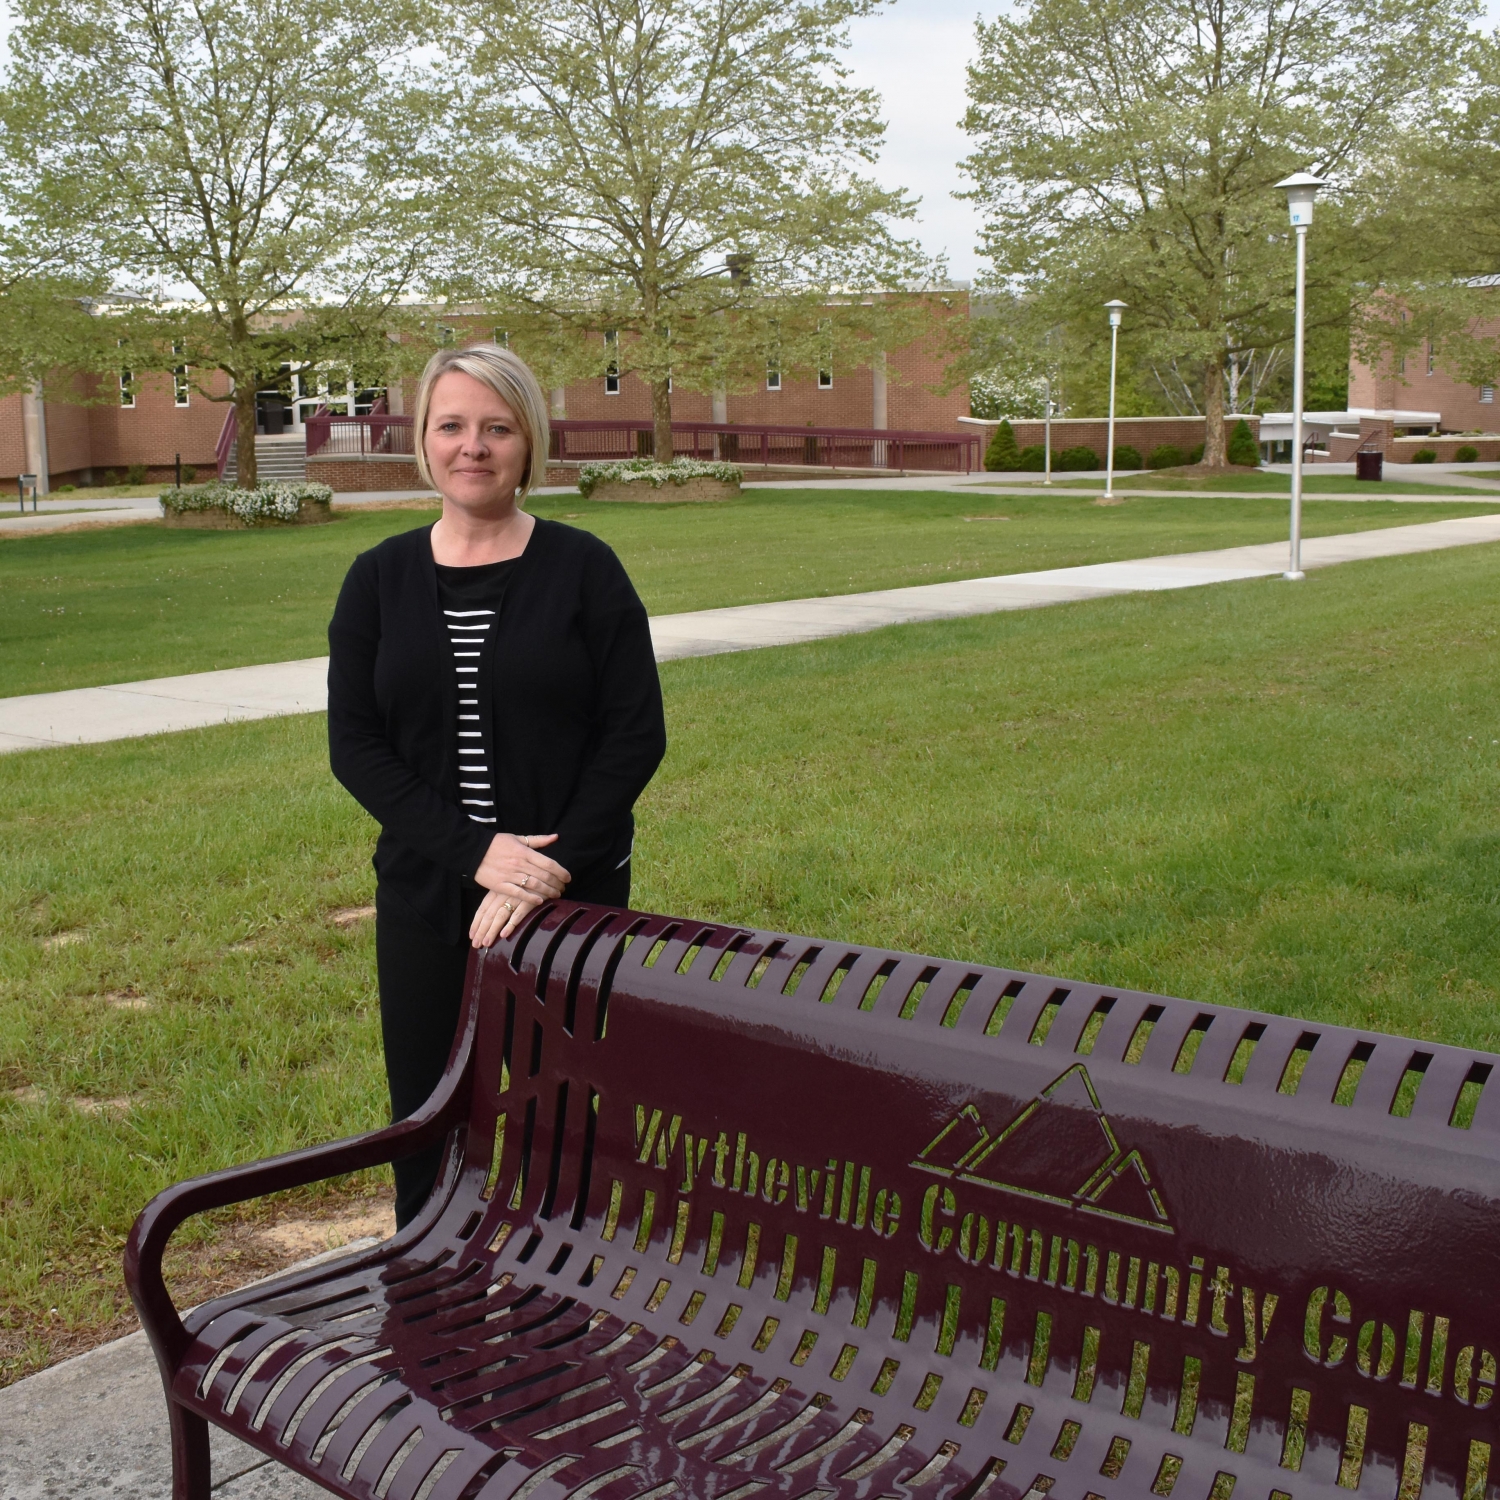 Wendy Nixon stadning outside on WCC's Wytheville Campus